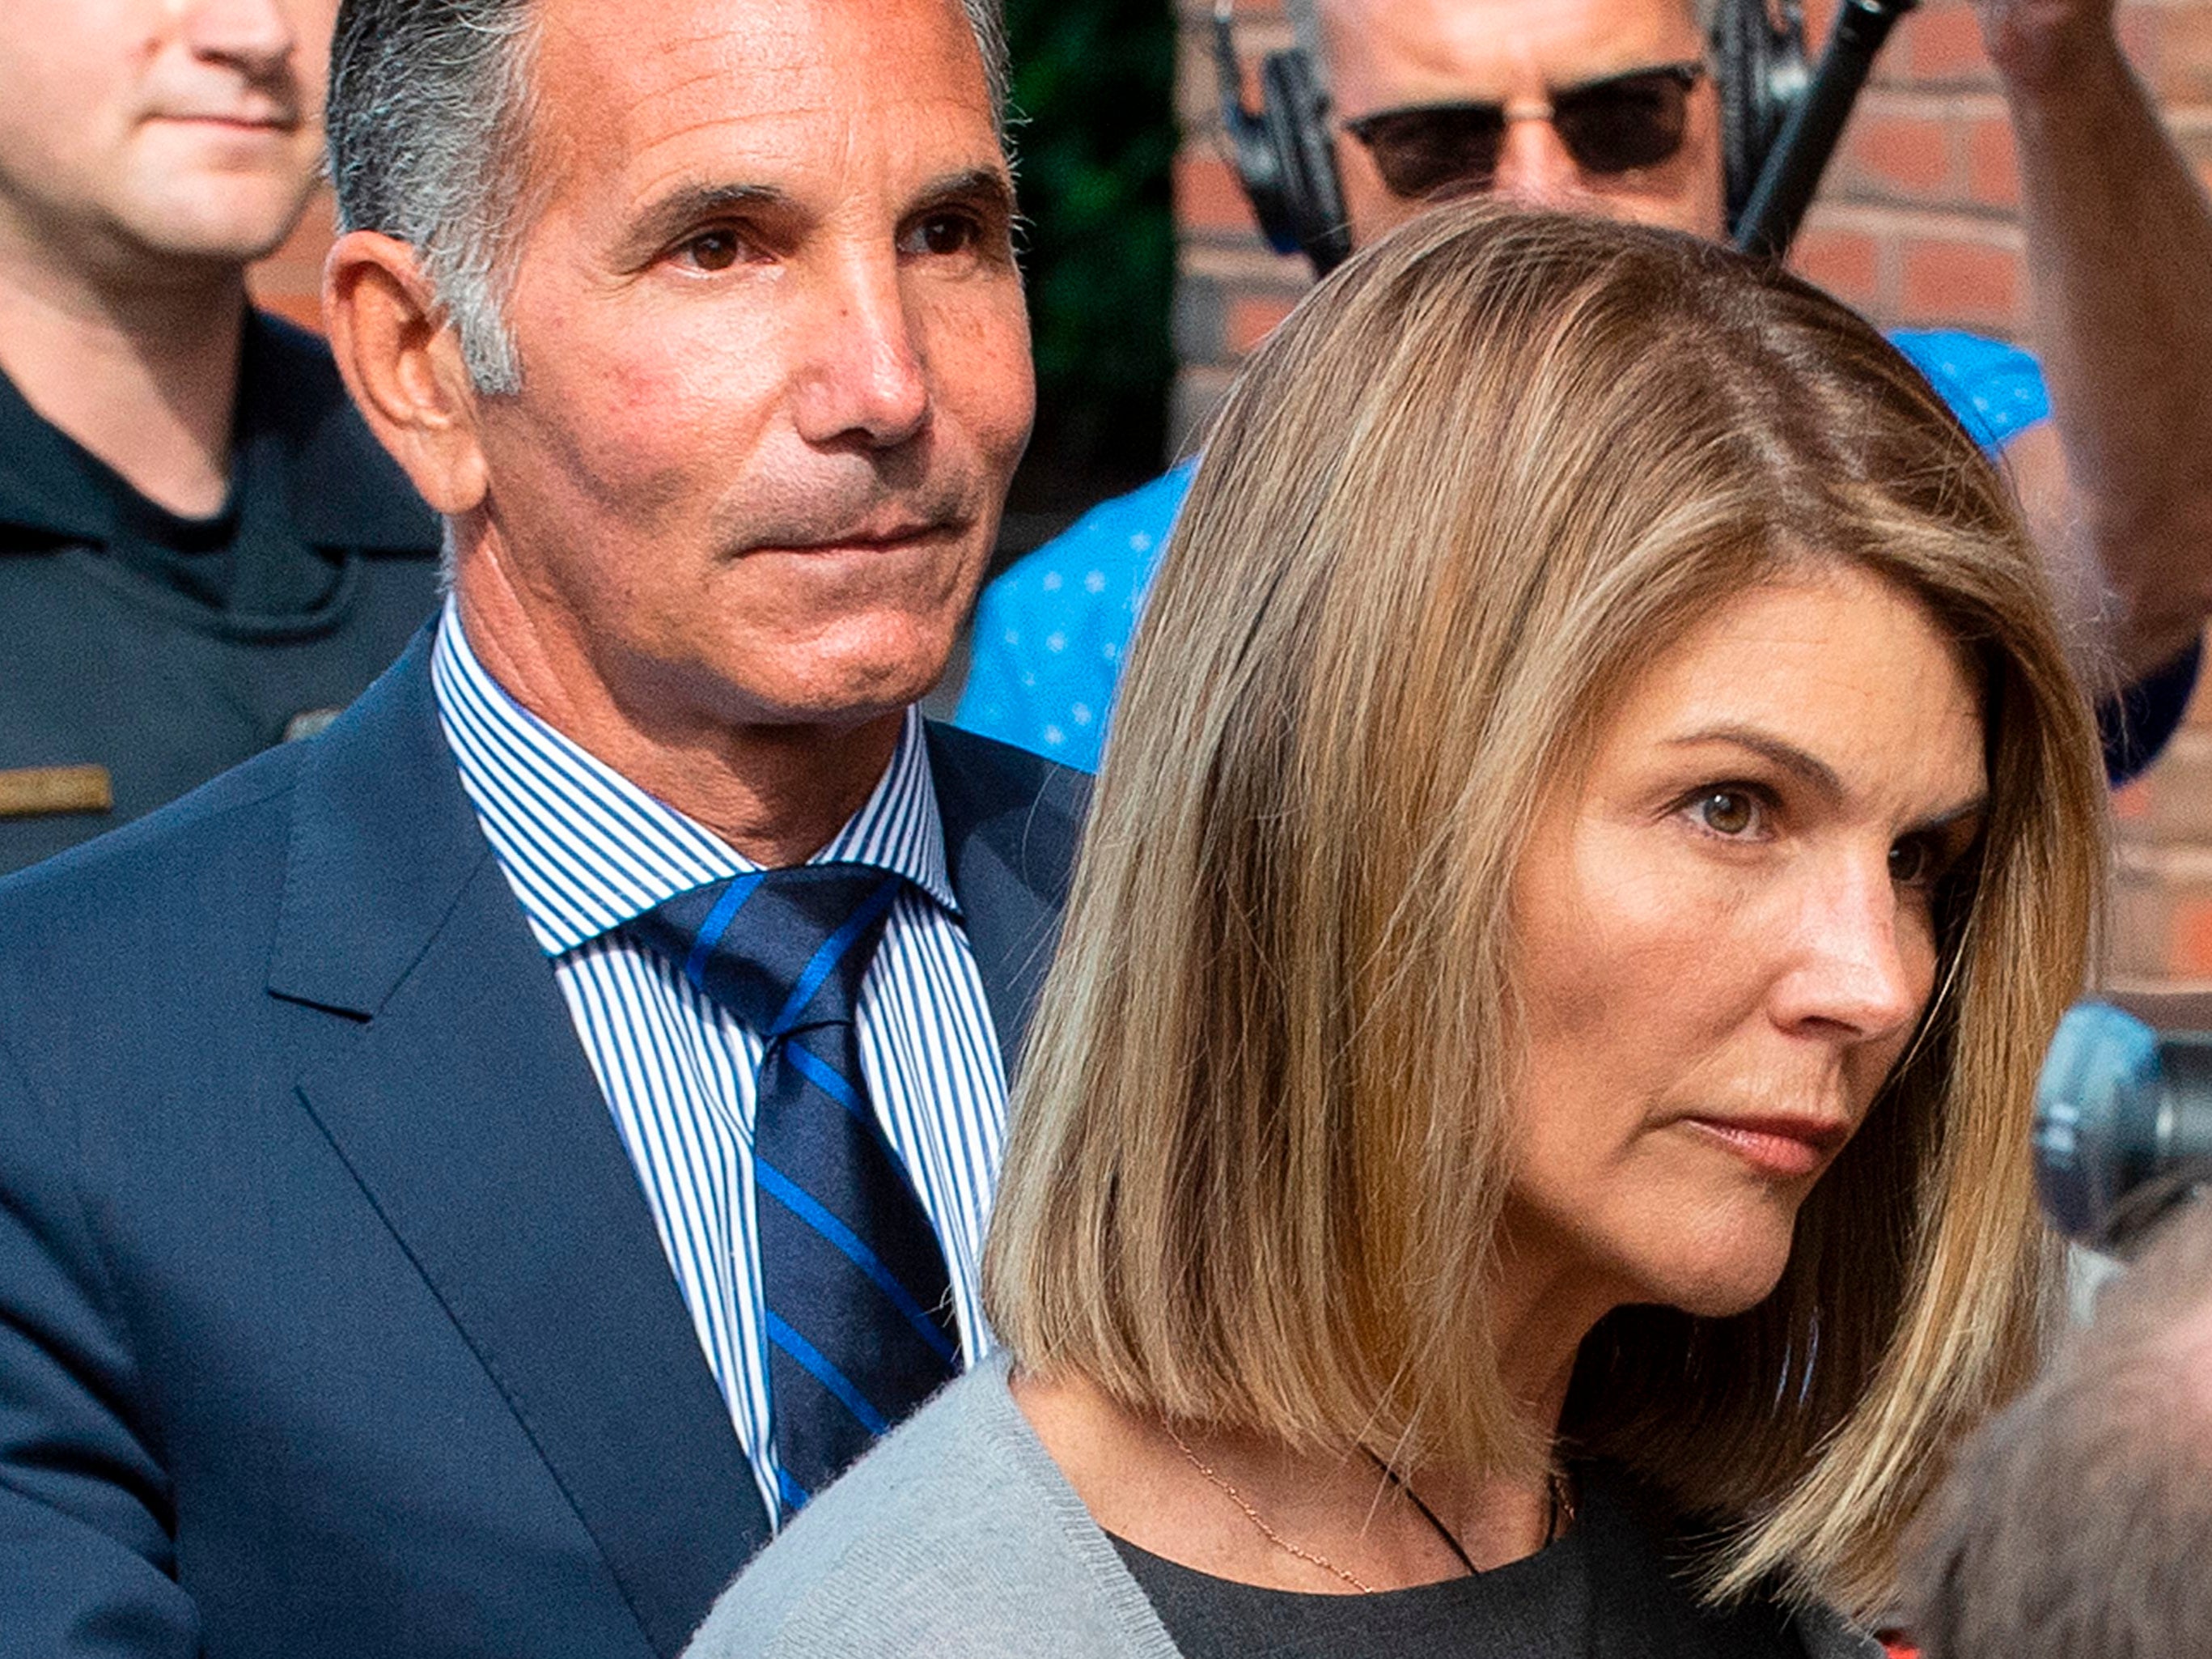 Lori Loughlin and husband Mossimo Giannulli exit the Boston federal courthouse on 27 August 2019